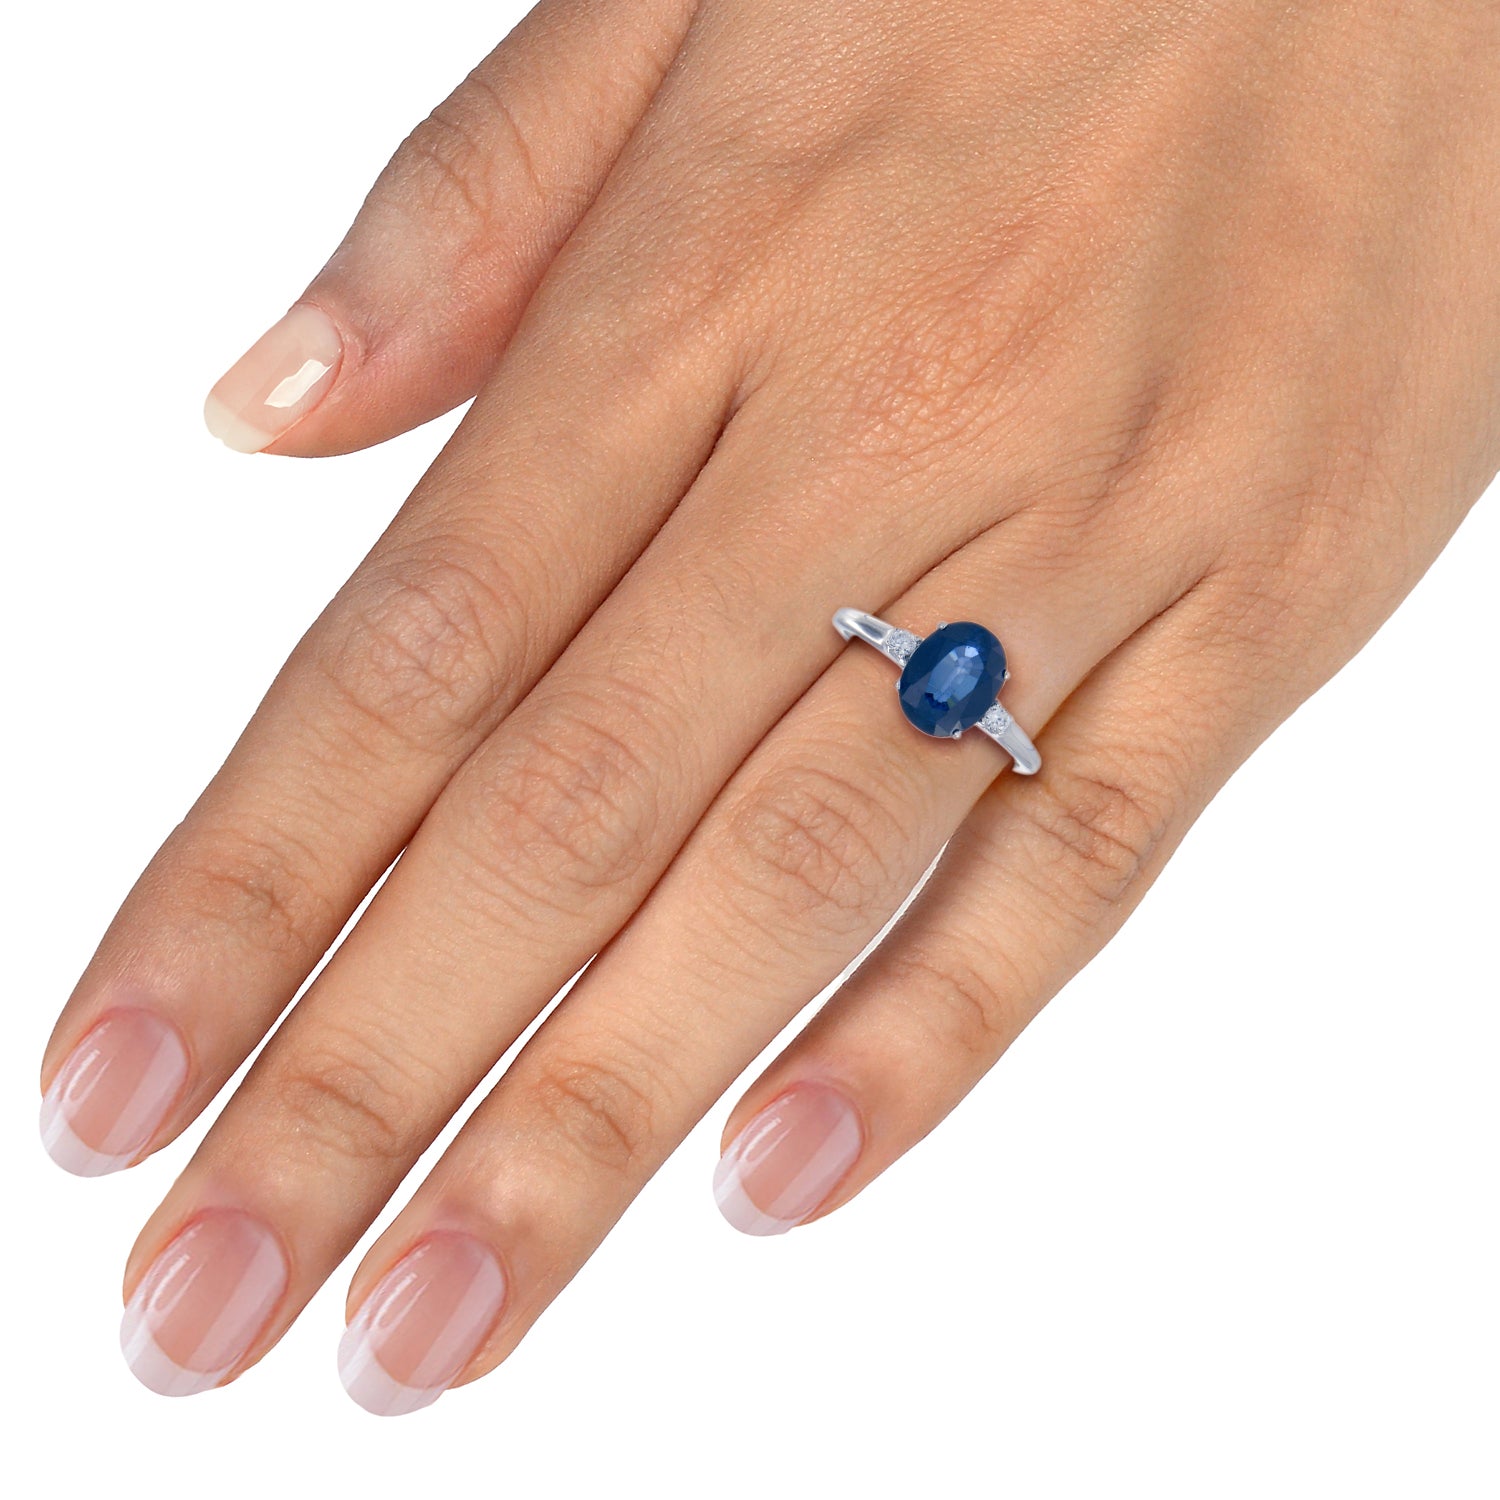 1.75 cttw Created Blue Sapphire Ring .925 Sterling Silver Oval 9x7 MM Size 7